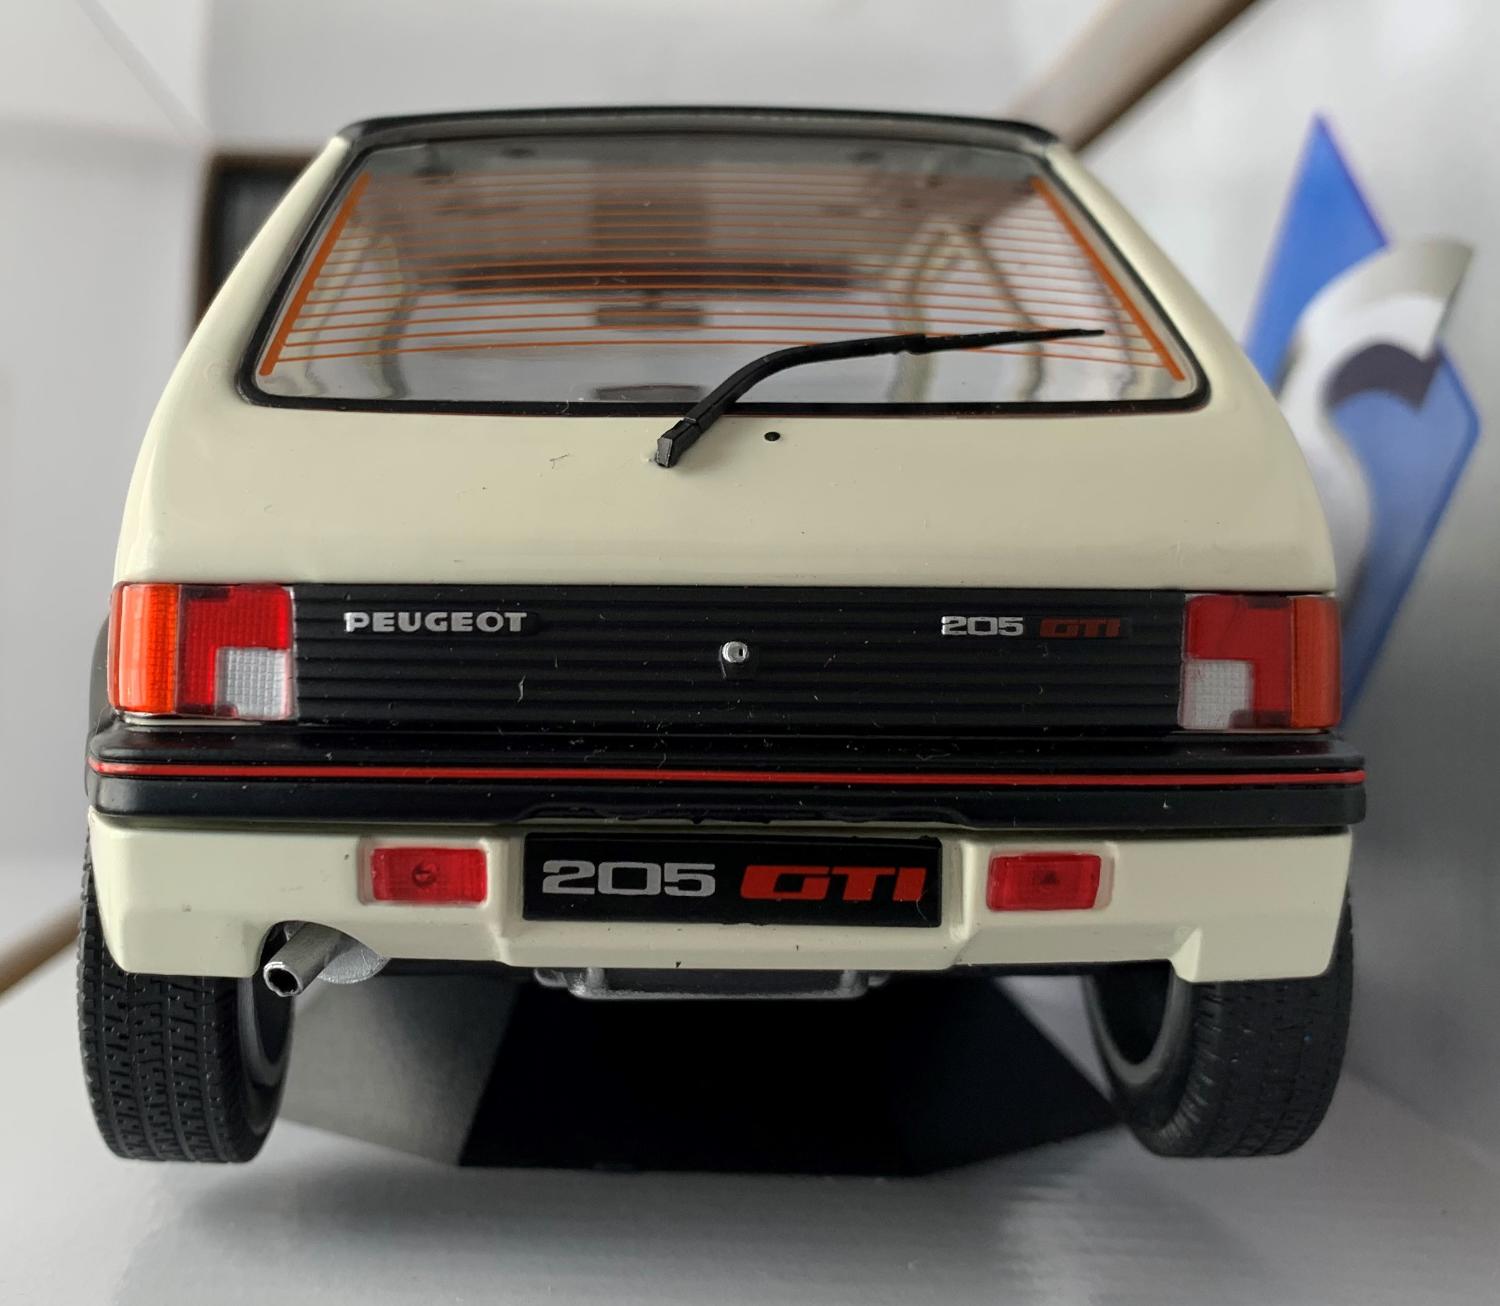 Peugeot 205 GTI 1.9L mk 1 1988 in white 1:18 scale model from Solido